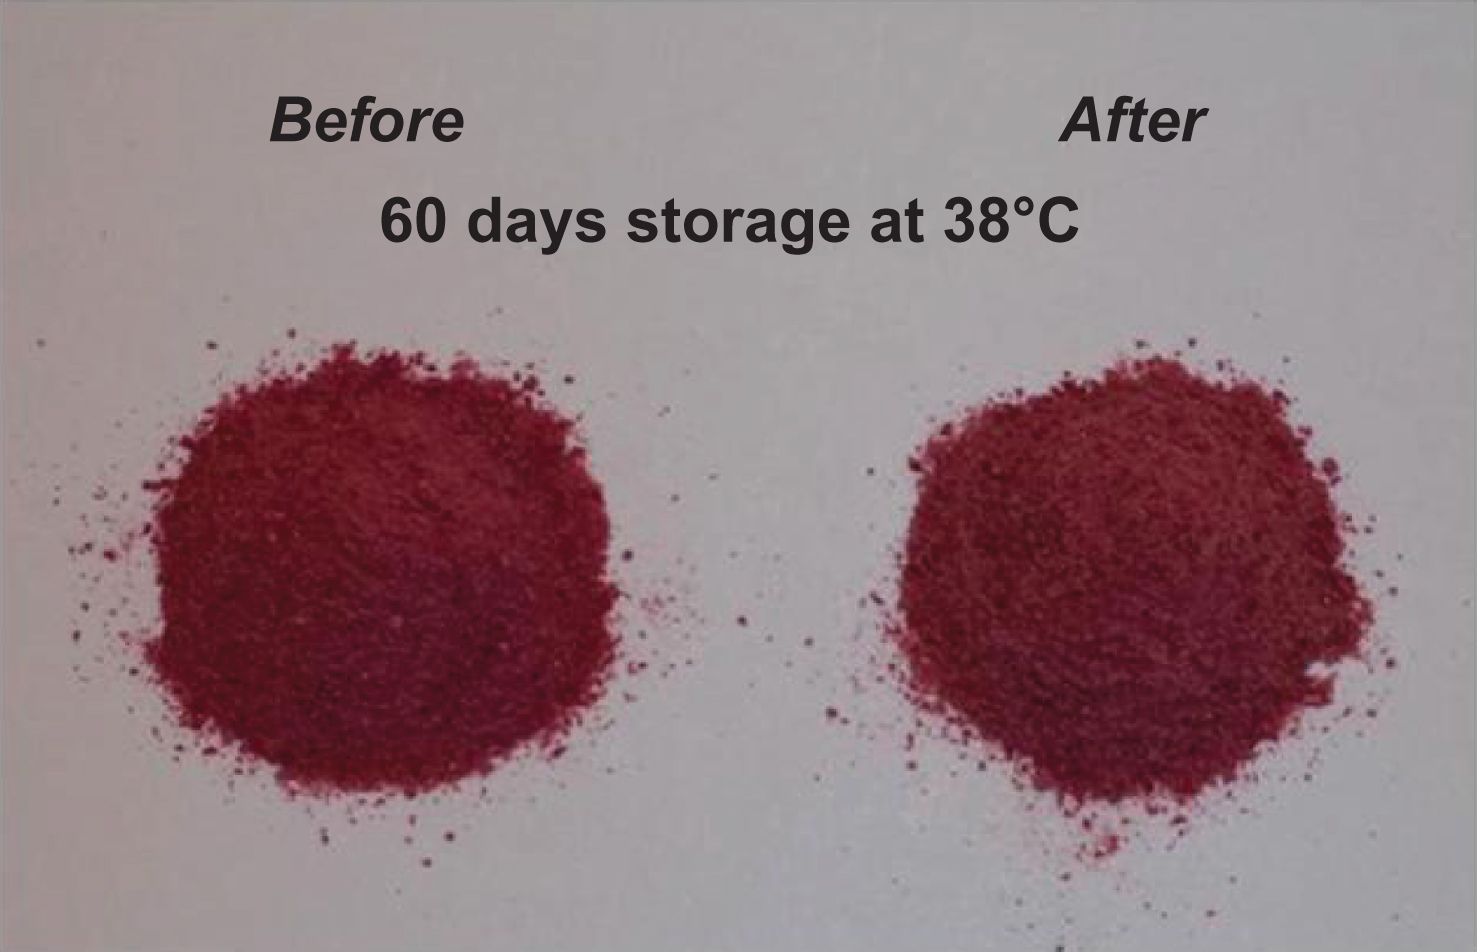 Encapsulated cherry juice powder (aw = 0.10) before and after 60 days storage at 38°C –left side: before storage; right side: after storage.